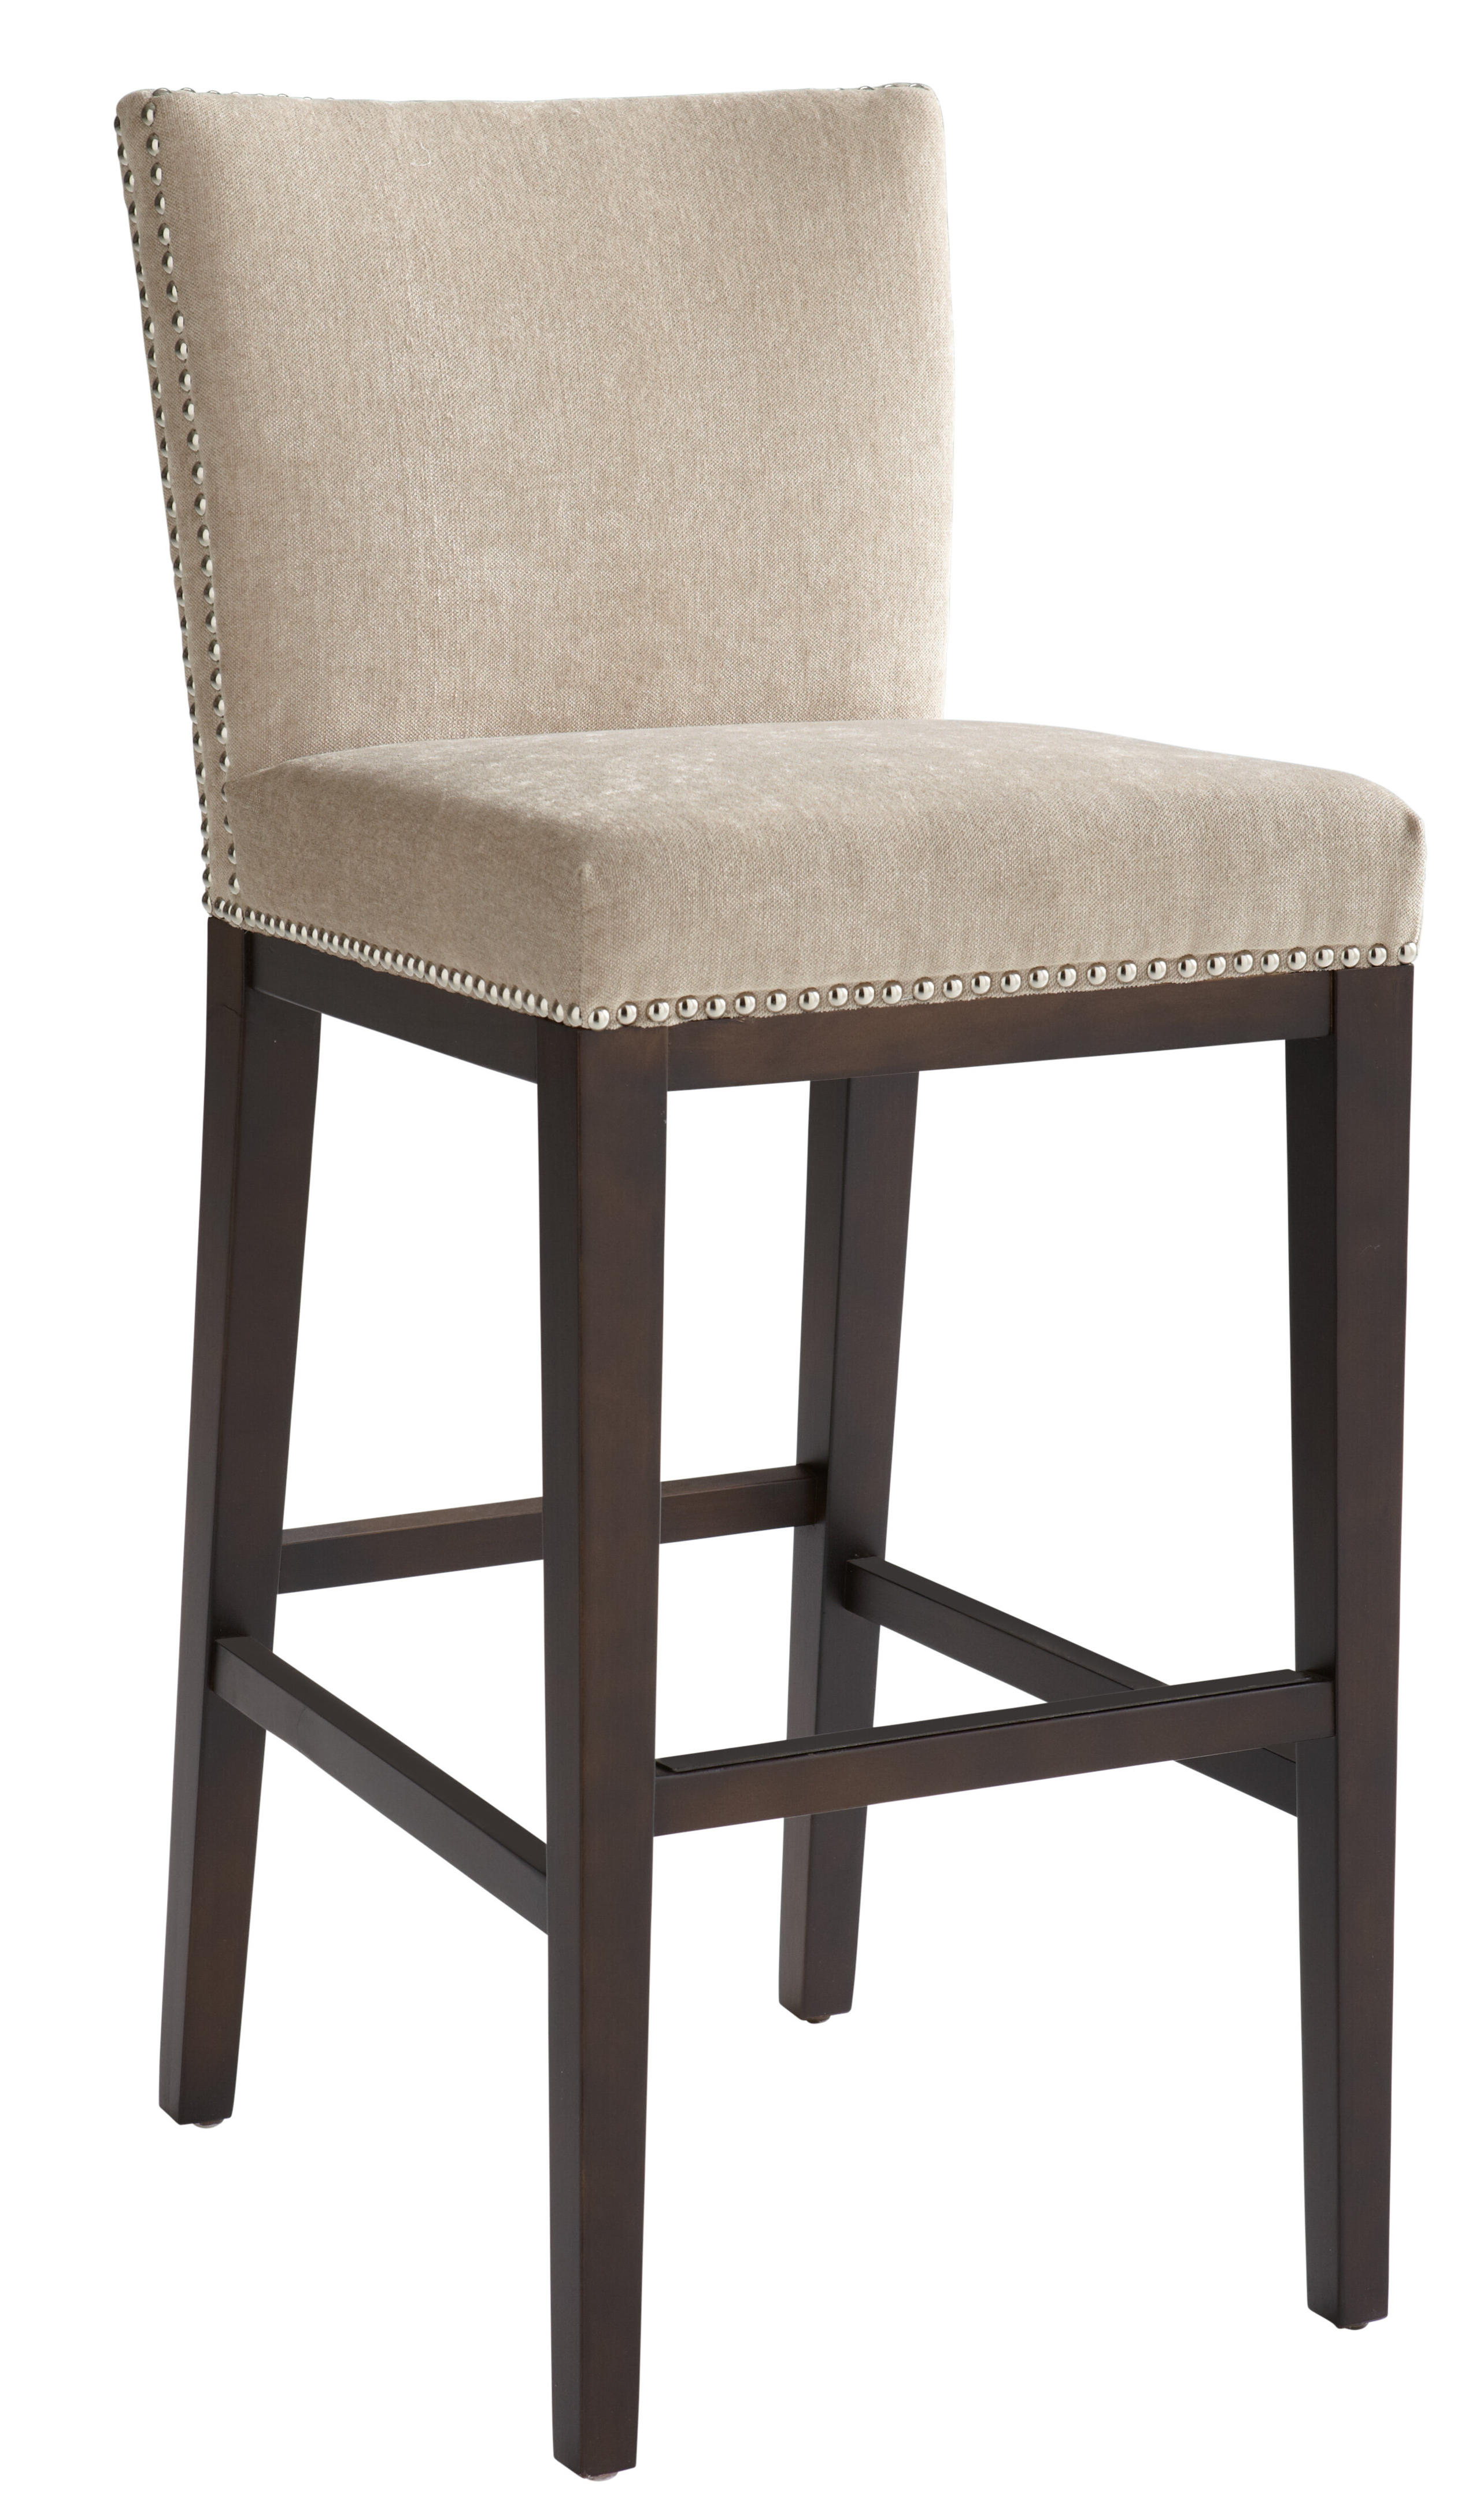 Vintage Fabric Barstool Color: Linen, Seat Height: 30"